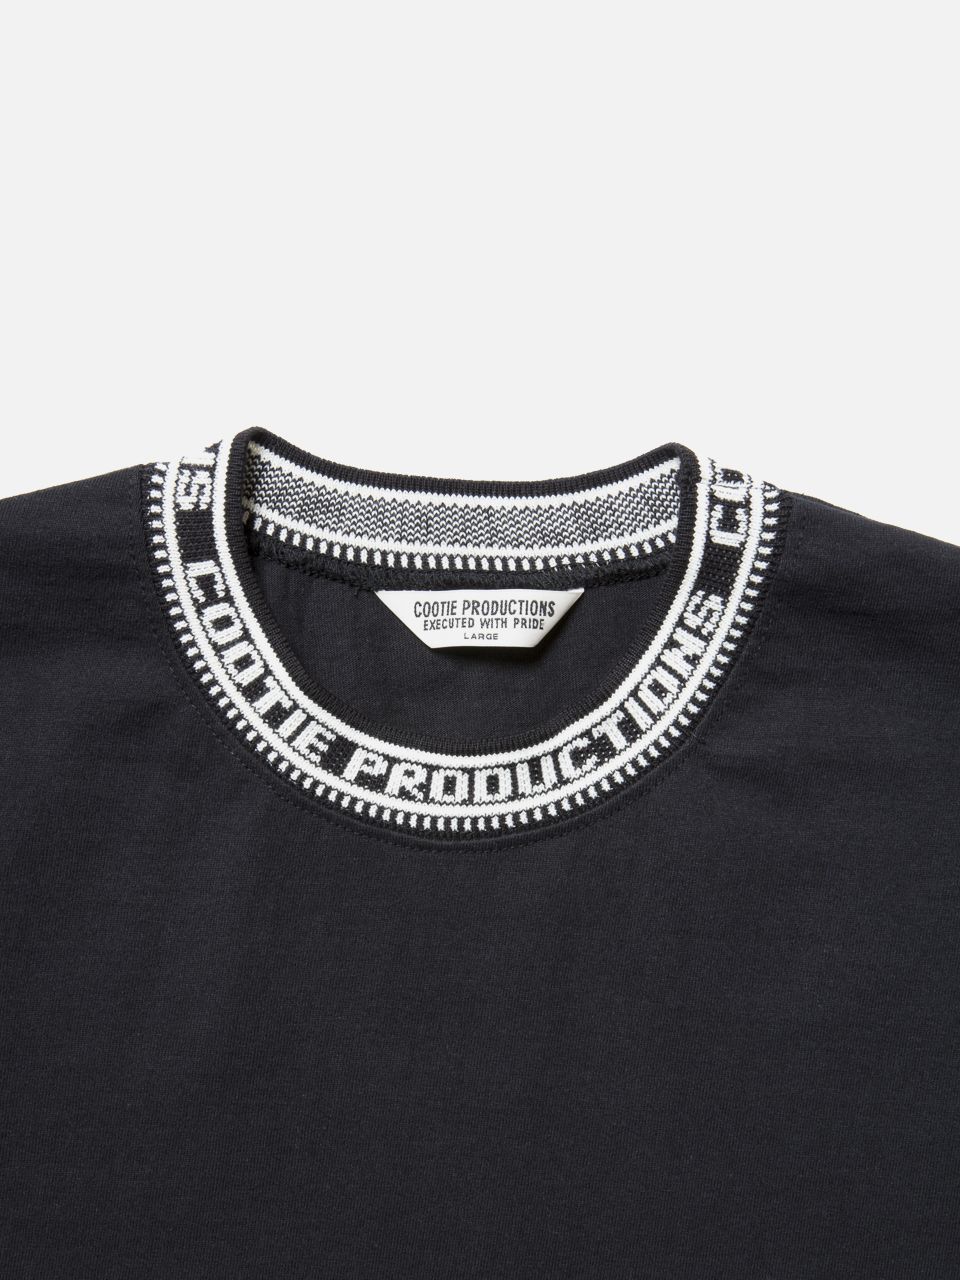 COOTIE クーティ 通販 19SS Jacquard Collar S/S Tee